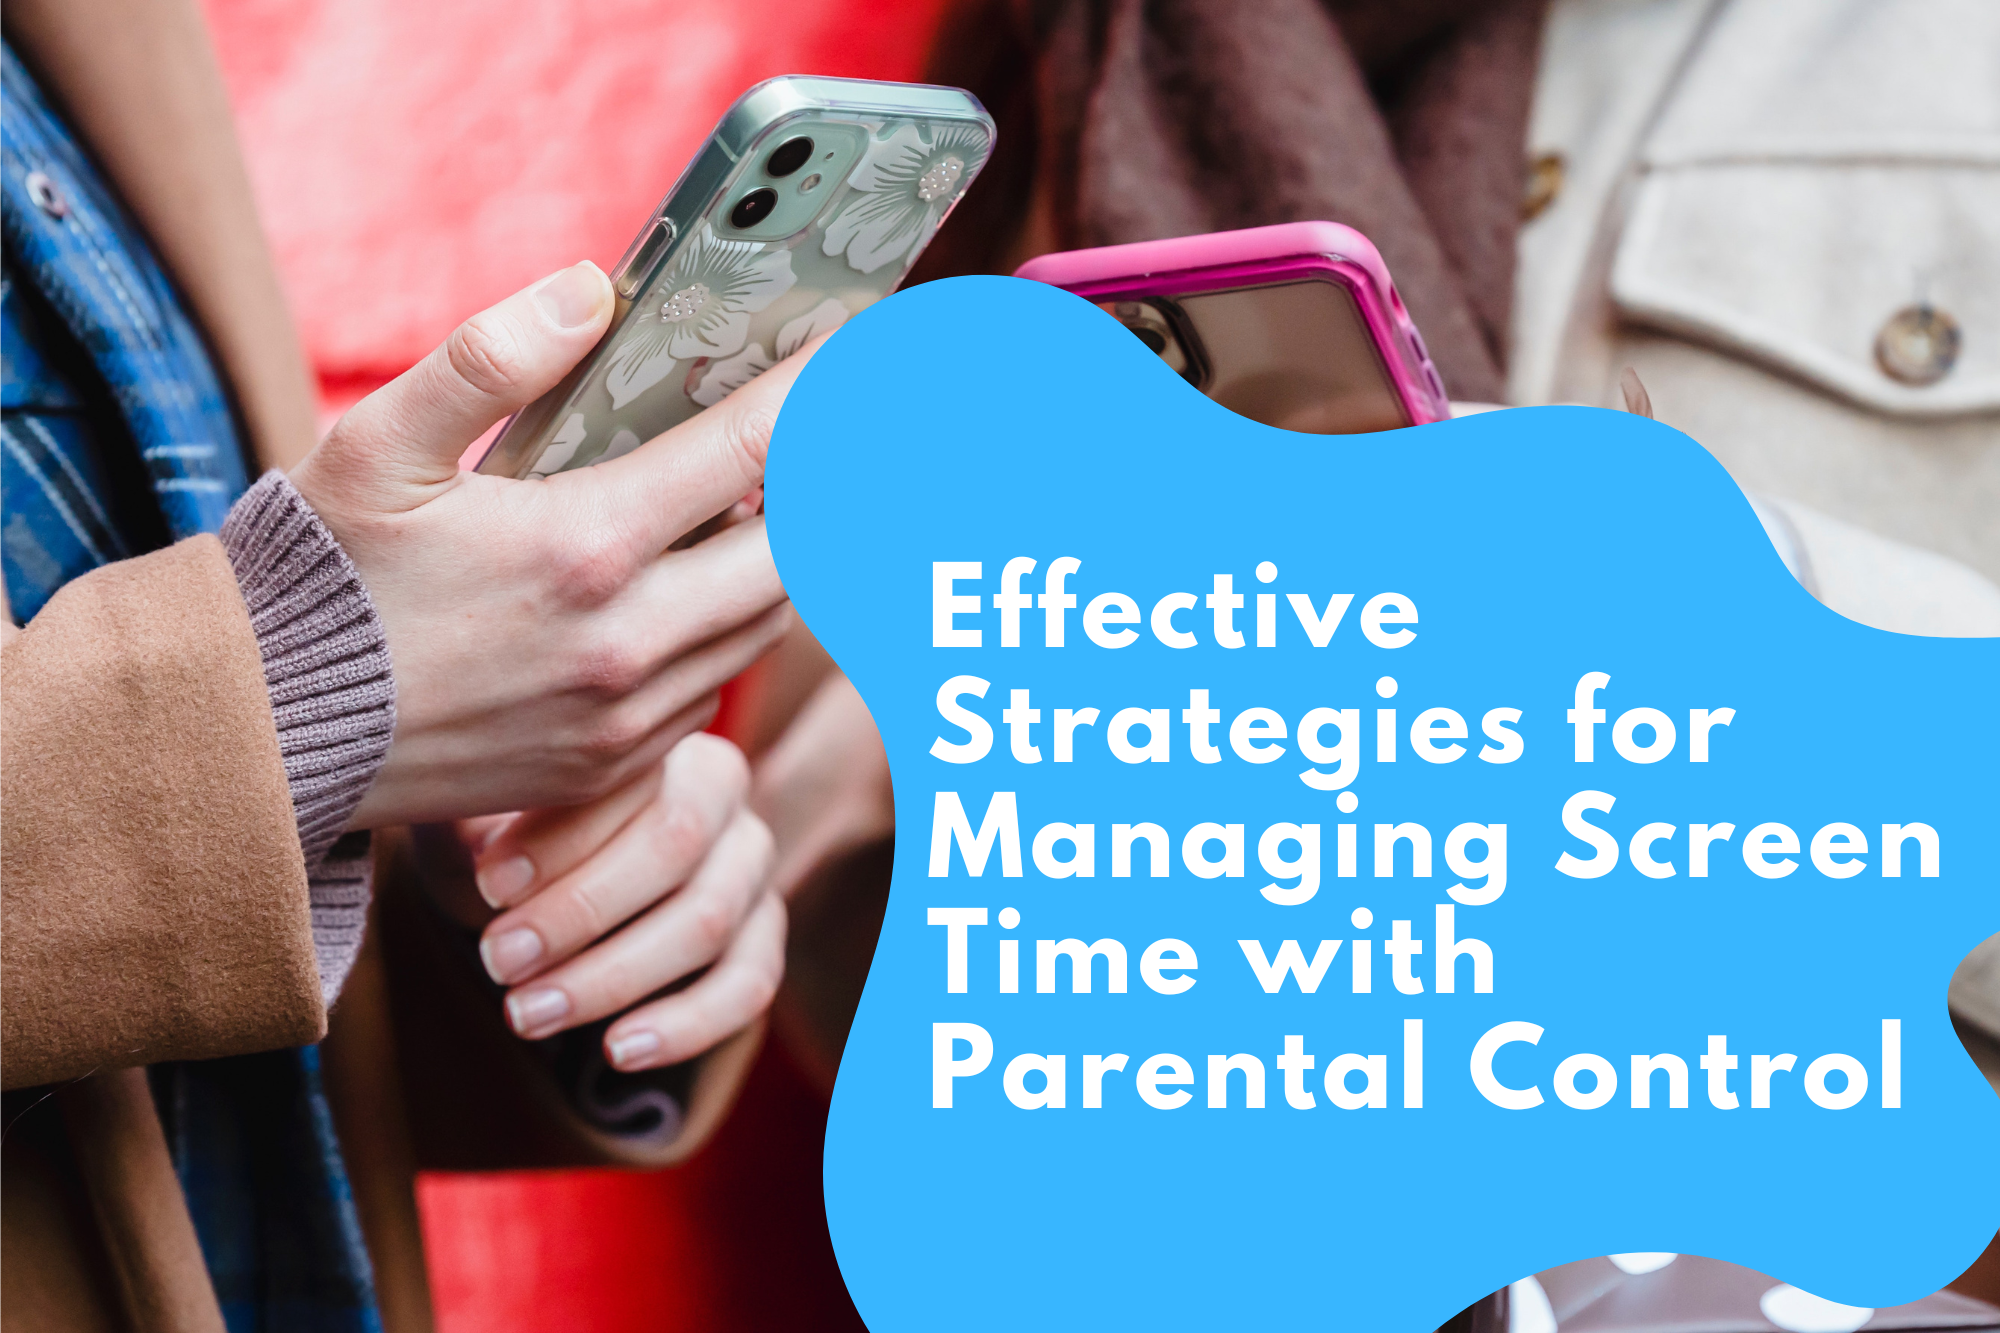 Effective Strategies for Managing Screen Time with Parental Control